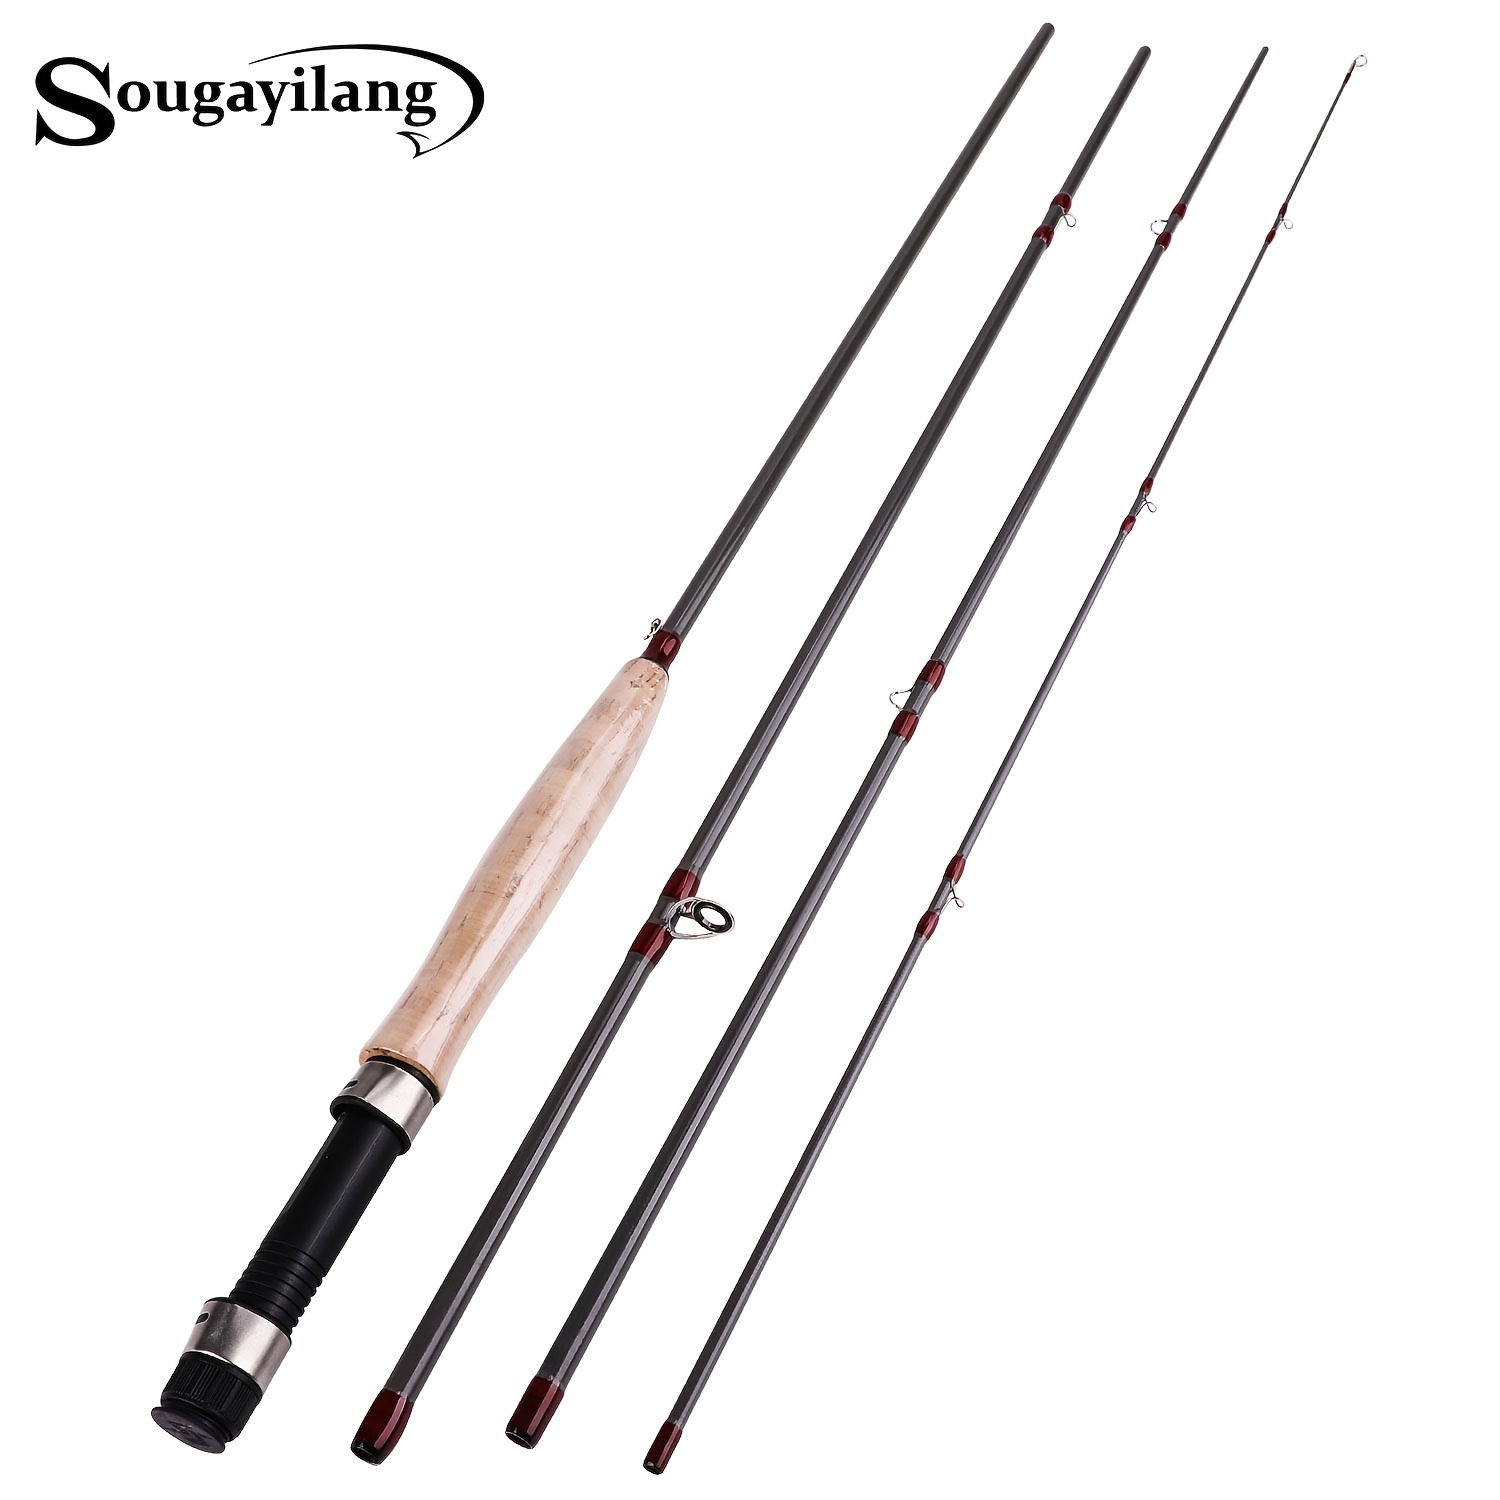 Sougayilang 5-Section Carbon Fiber Fly Fishing Rod for Travel -  Lightweight, Durable, and Portable